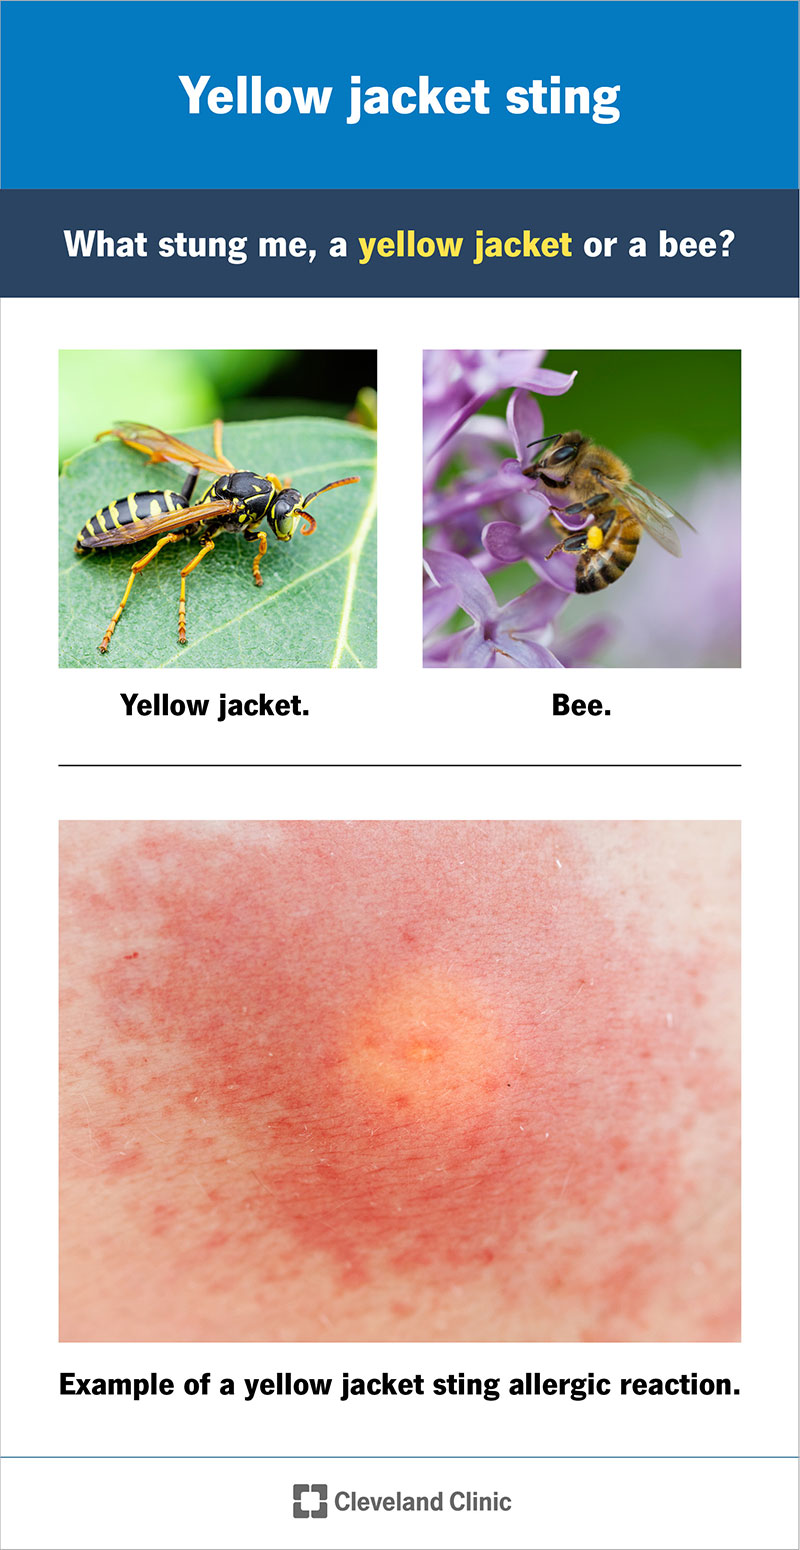 https://my.clevelandclinic.org/-/scassets/images/org/health/articles/yellow-jacket-sting.jpg